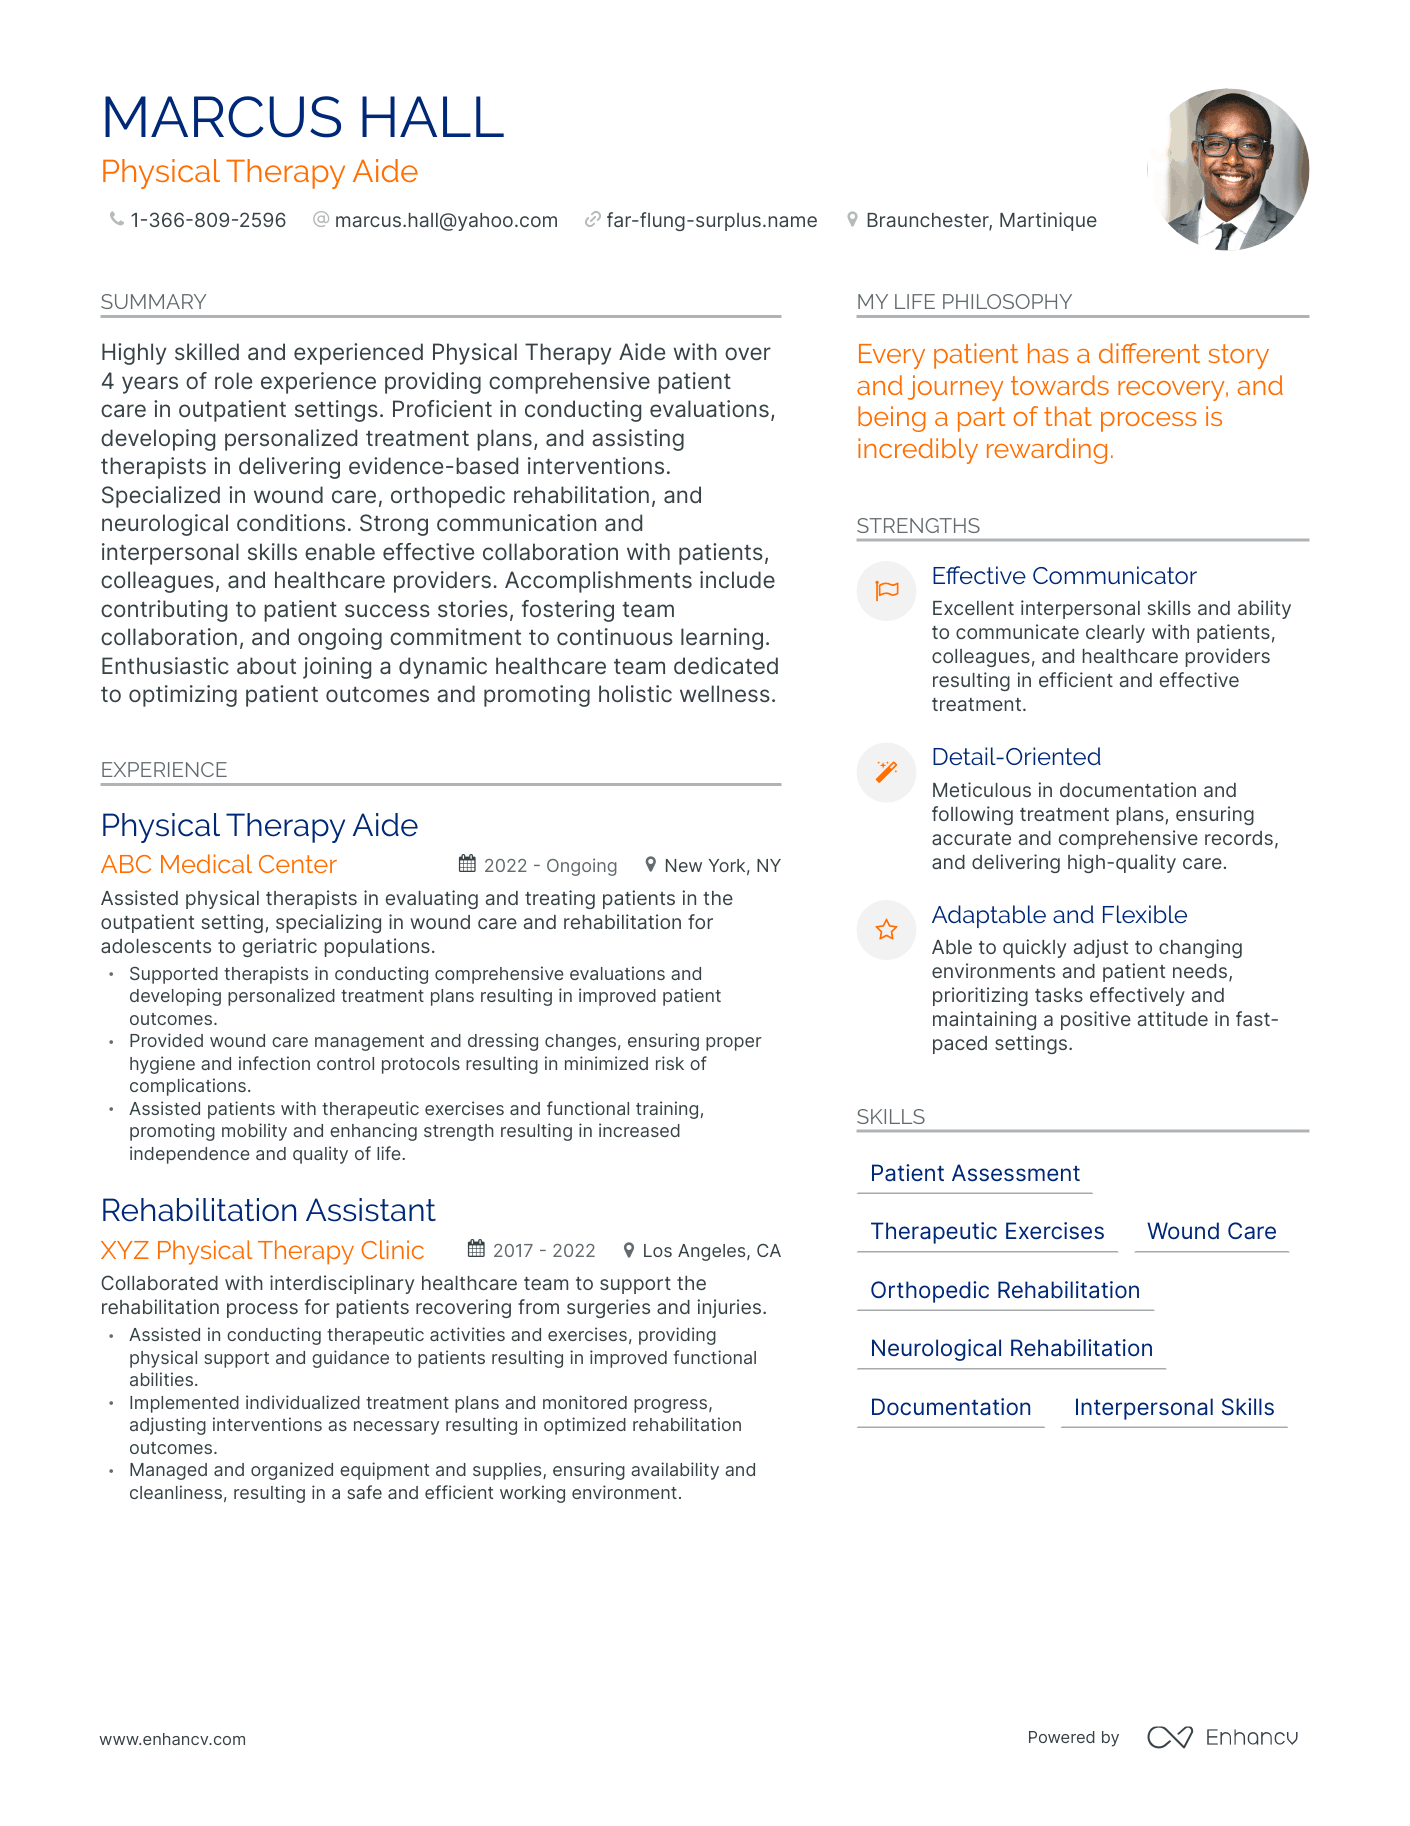 Physical Therapy Aide resume example